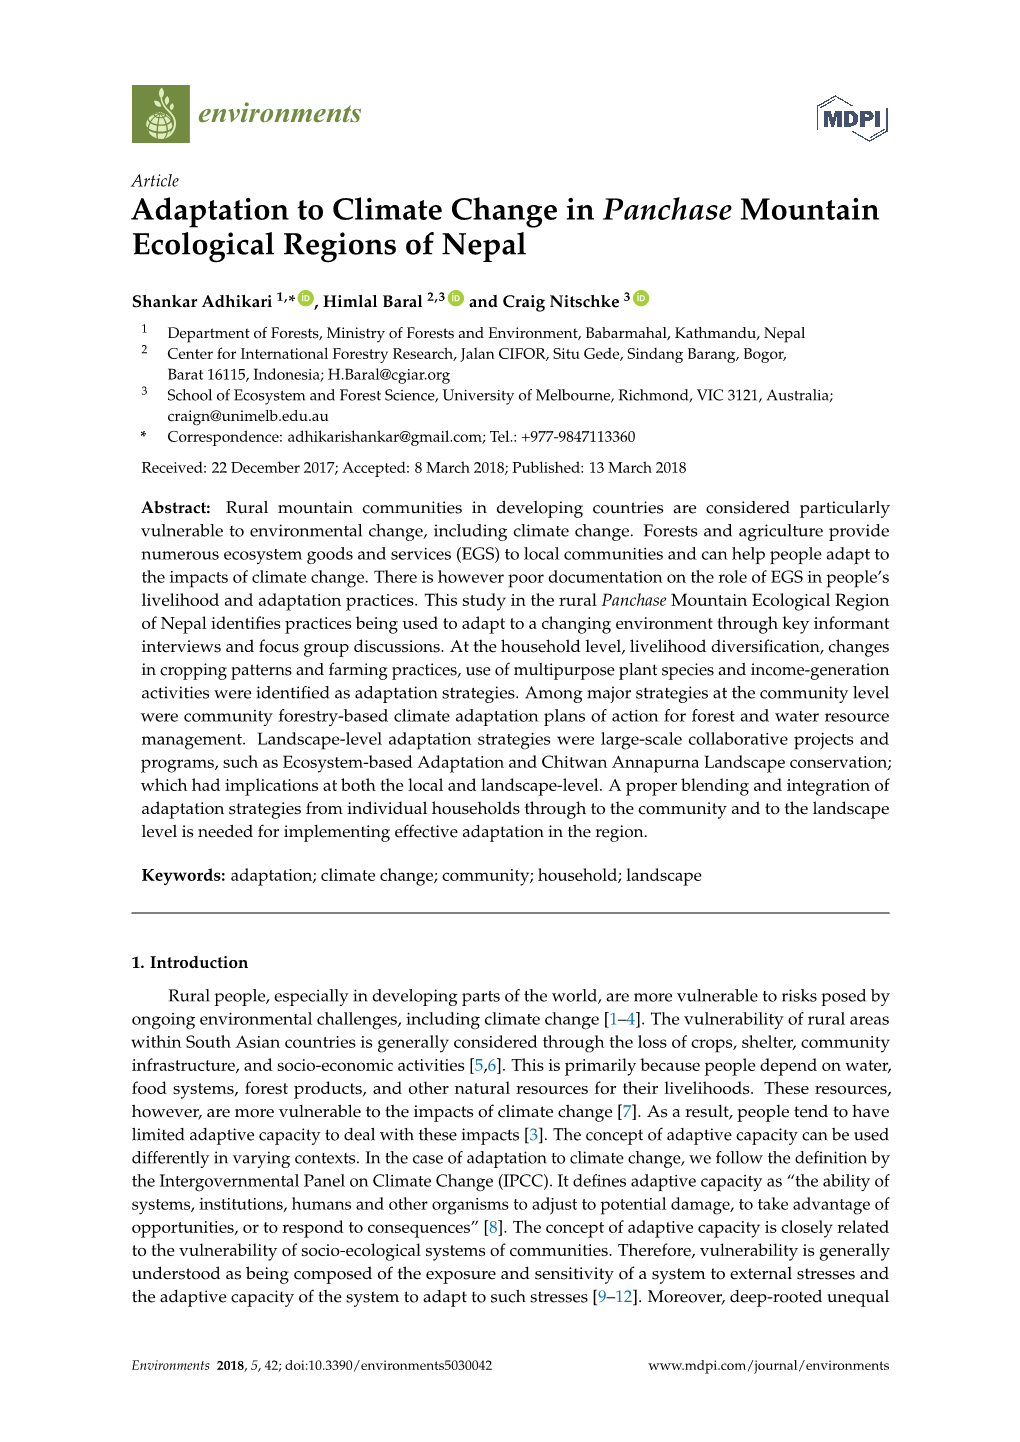 Adaptation to Climate Change in Panchase Mountain Ecological Regions of Nepal